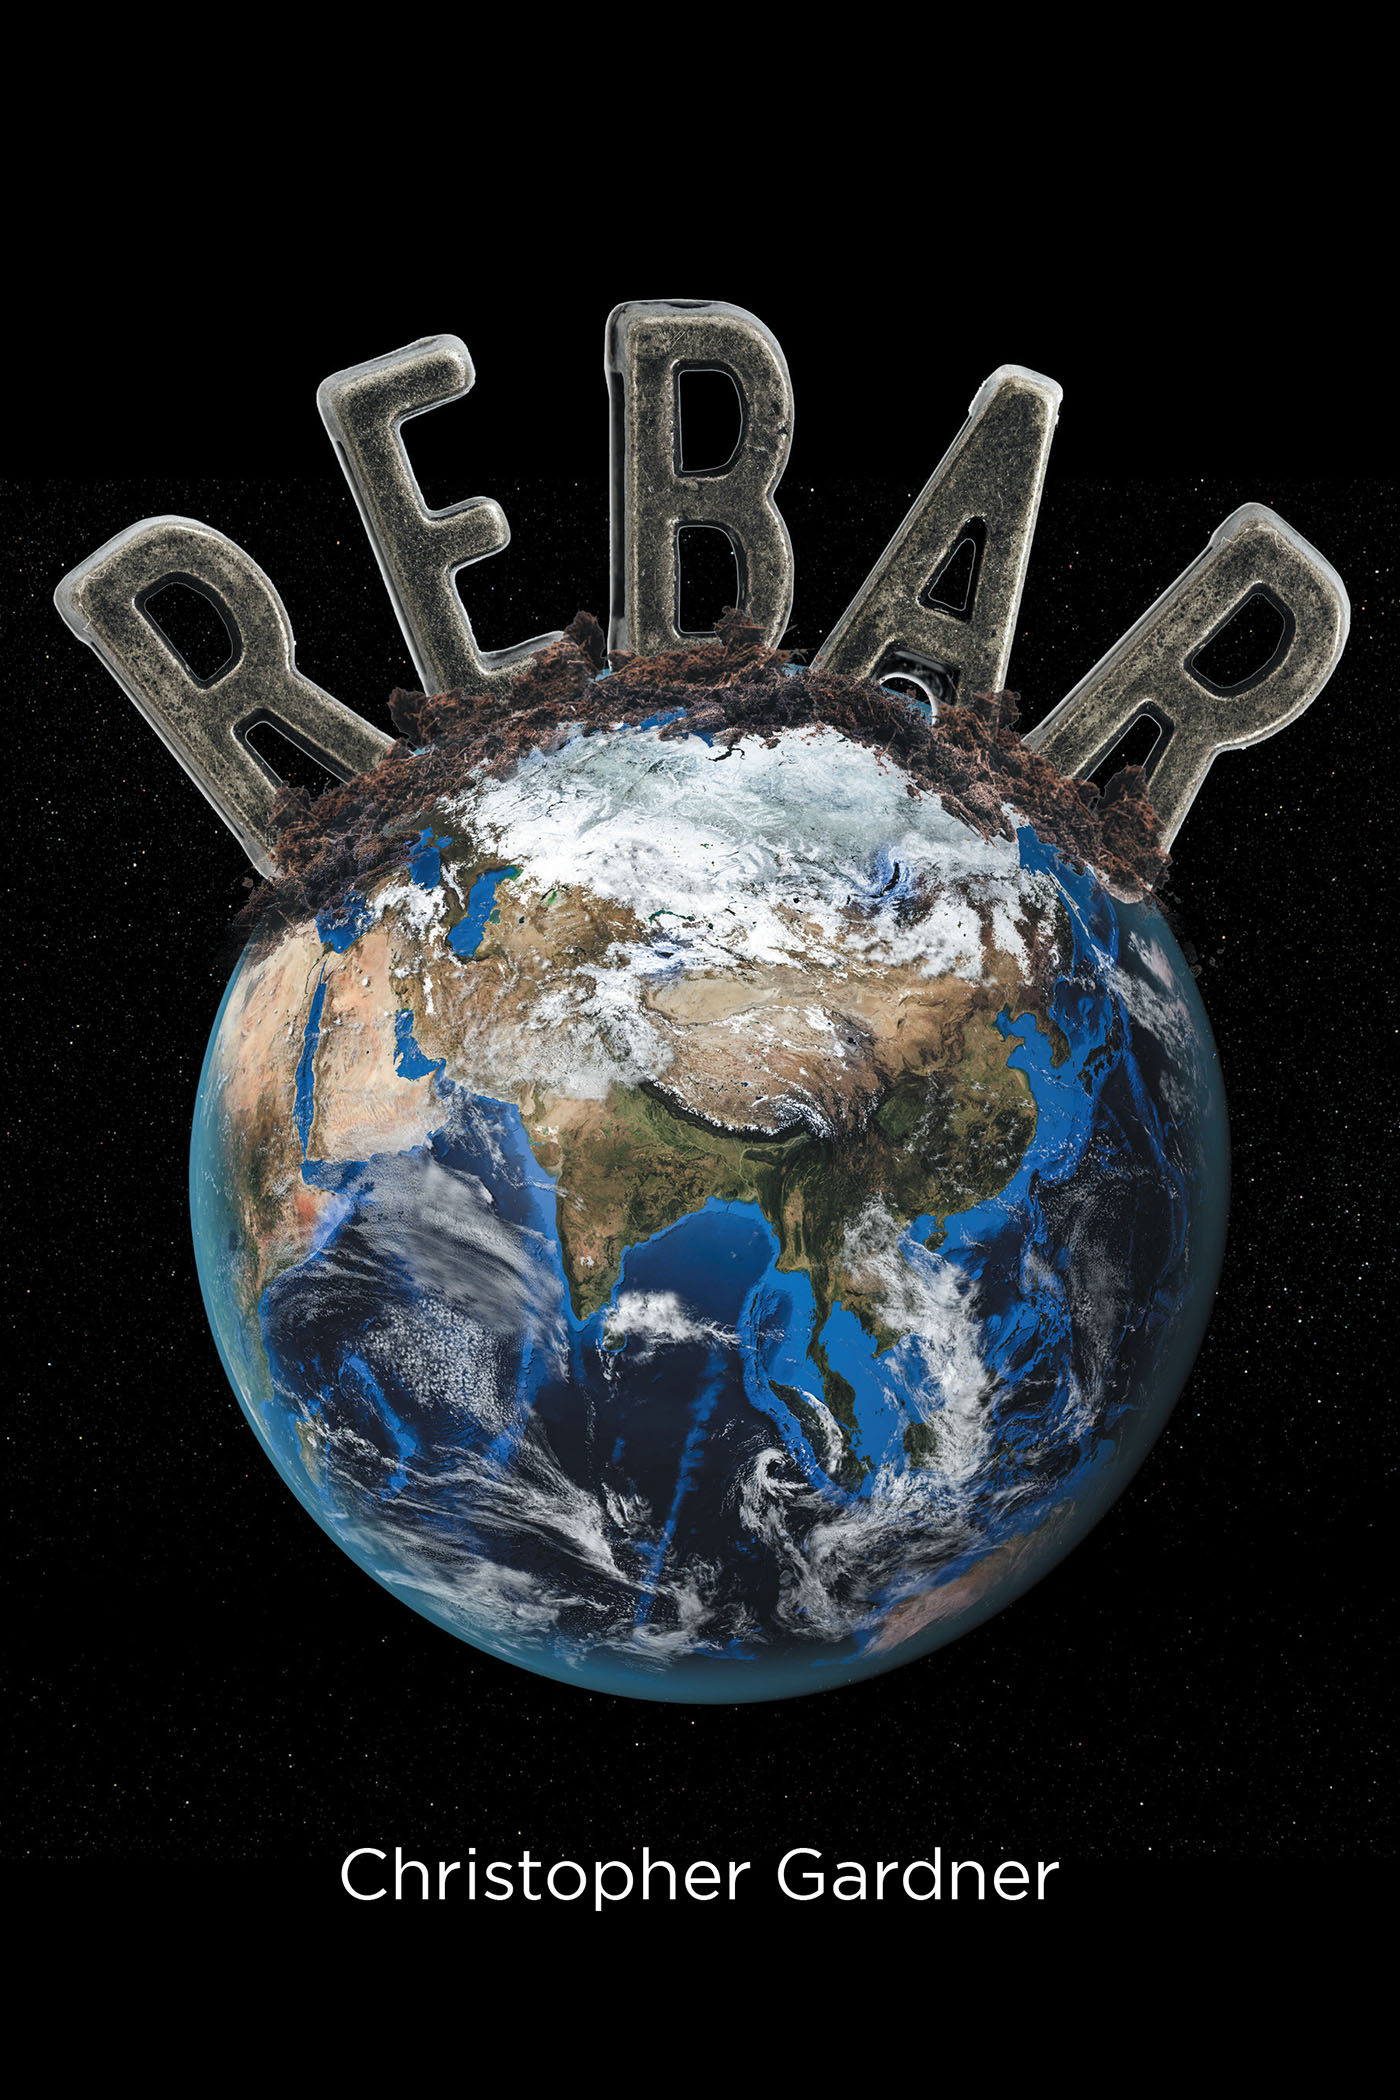 Author Christopher Gardner’s New Book, "Rebar," is a Fascinating Story of Two Geographers Who Are Sent on a Life Changing Trip in Order to Research Antipodes